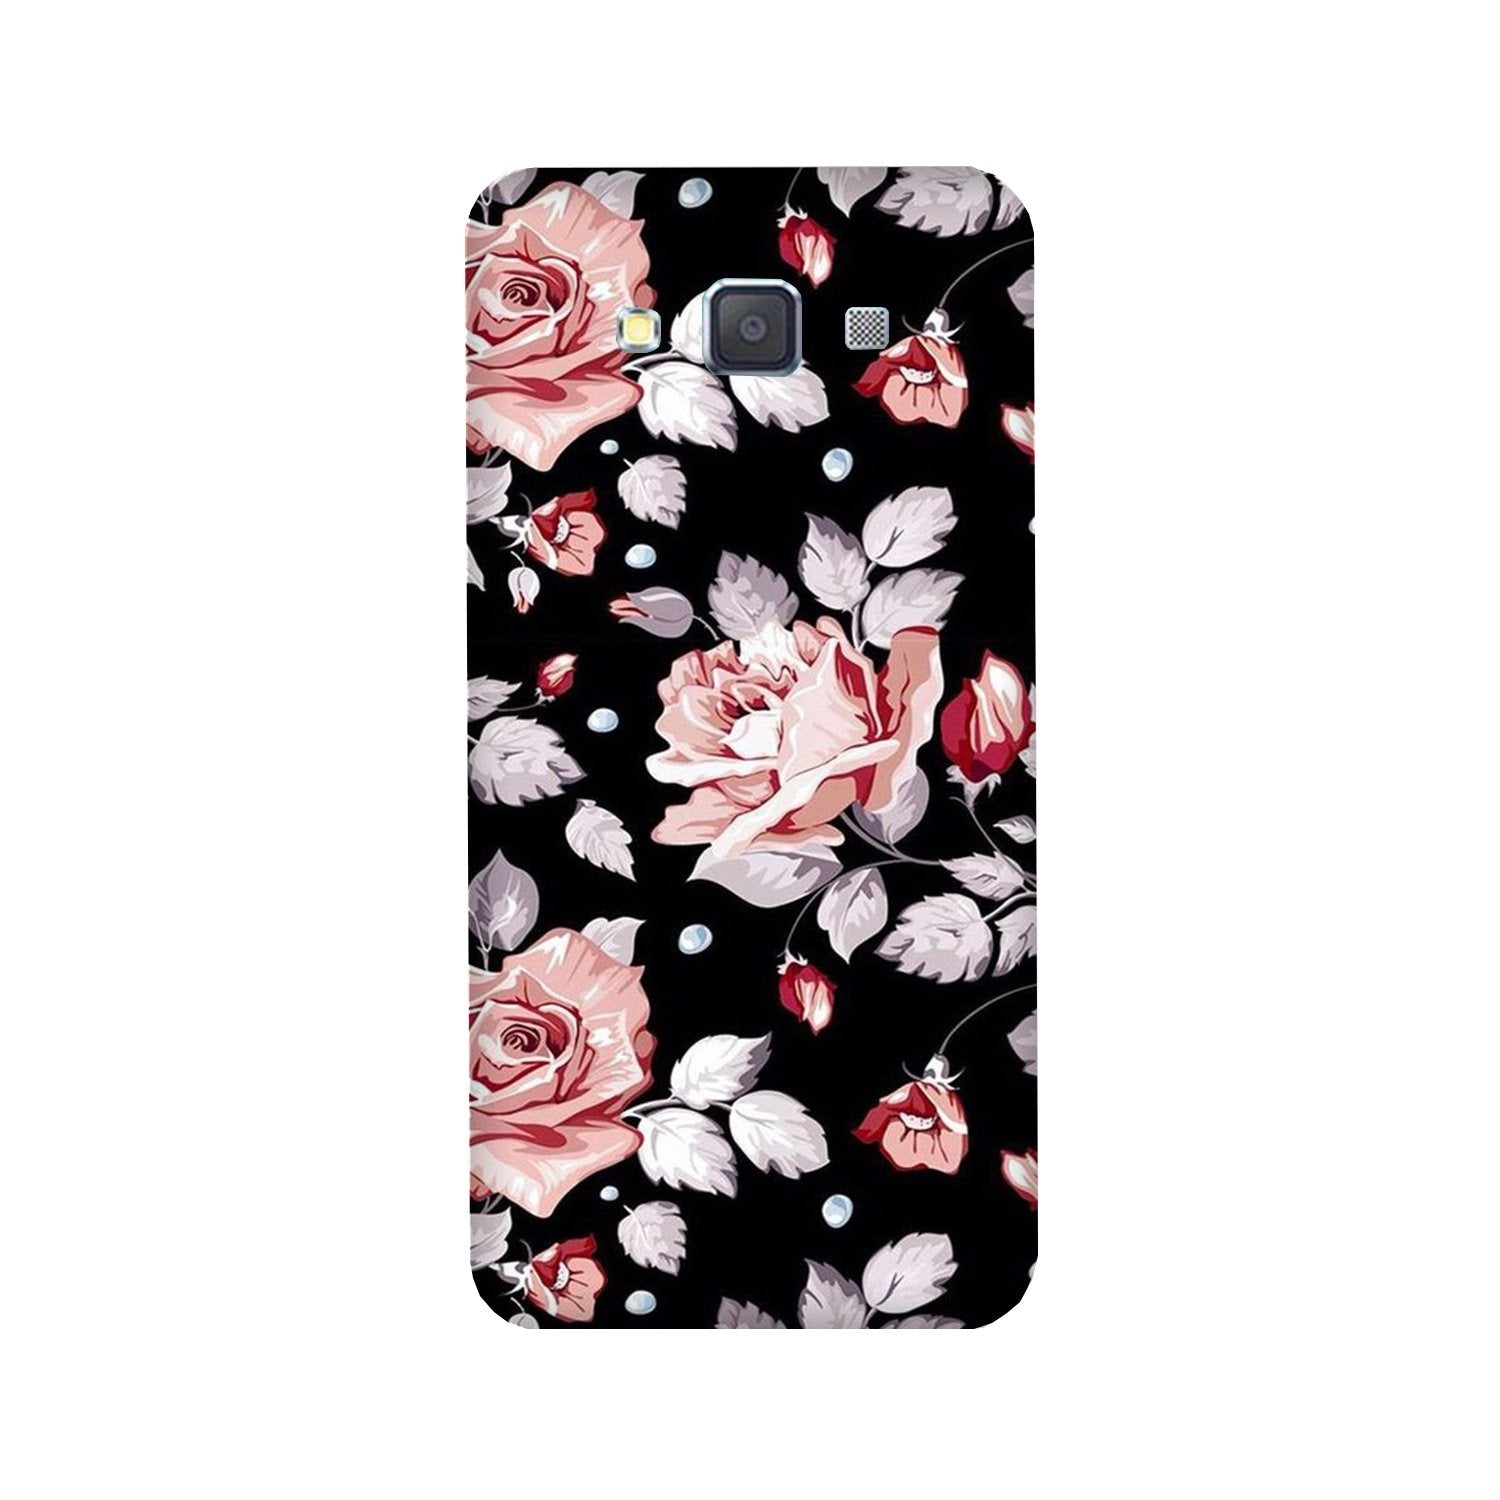 Pink rose Case for Galaxy Grand 2